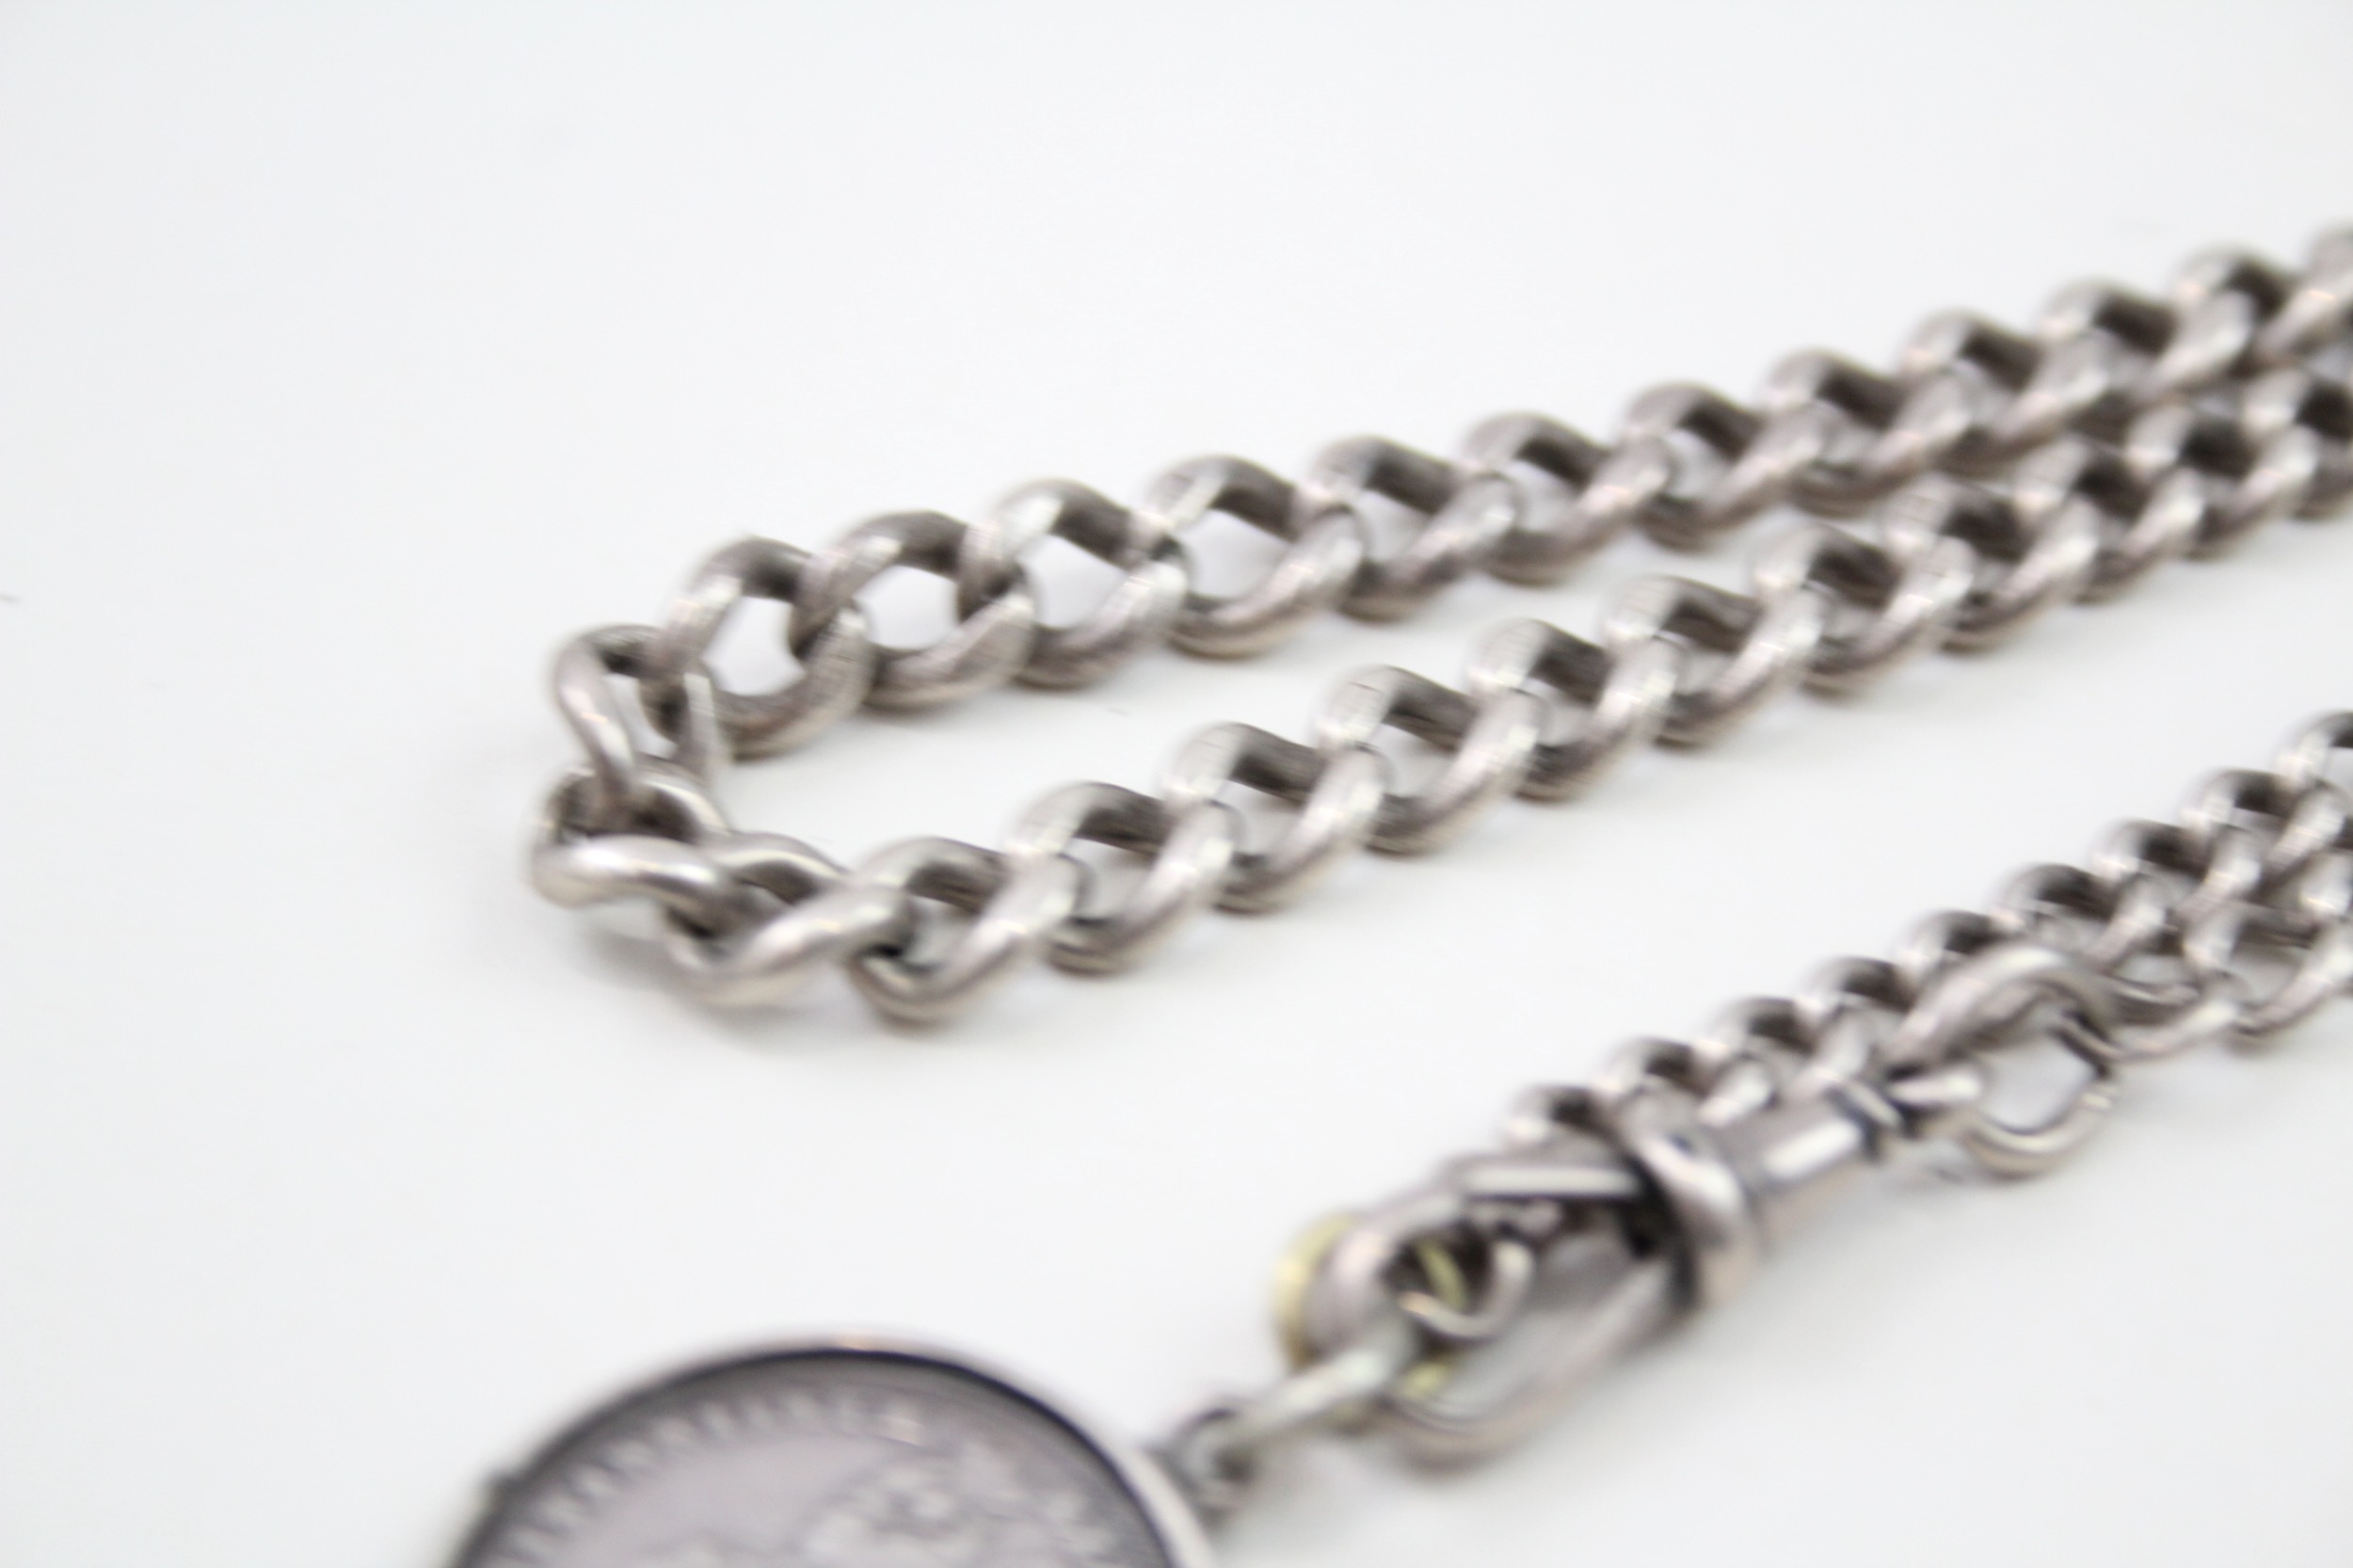 Silver antique watch chain with coin fob (40g) - Image 3 of 6